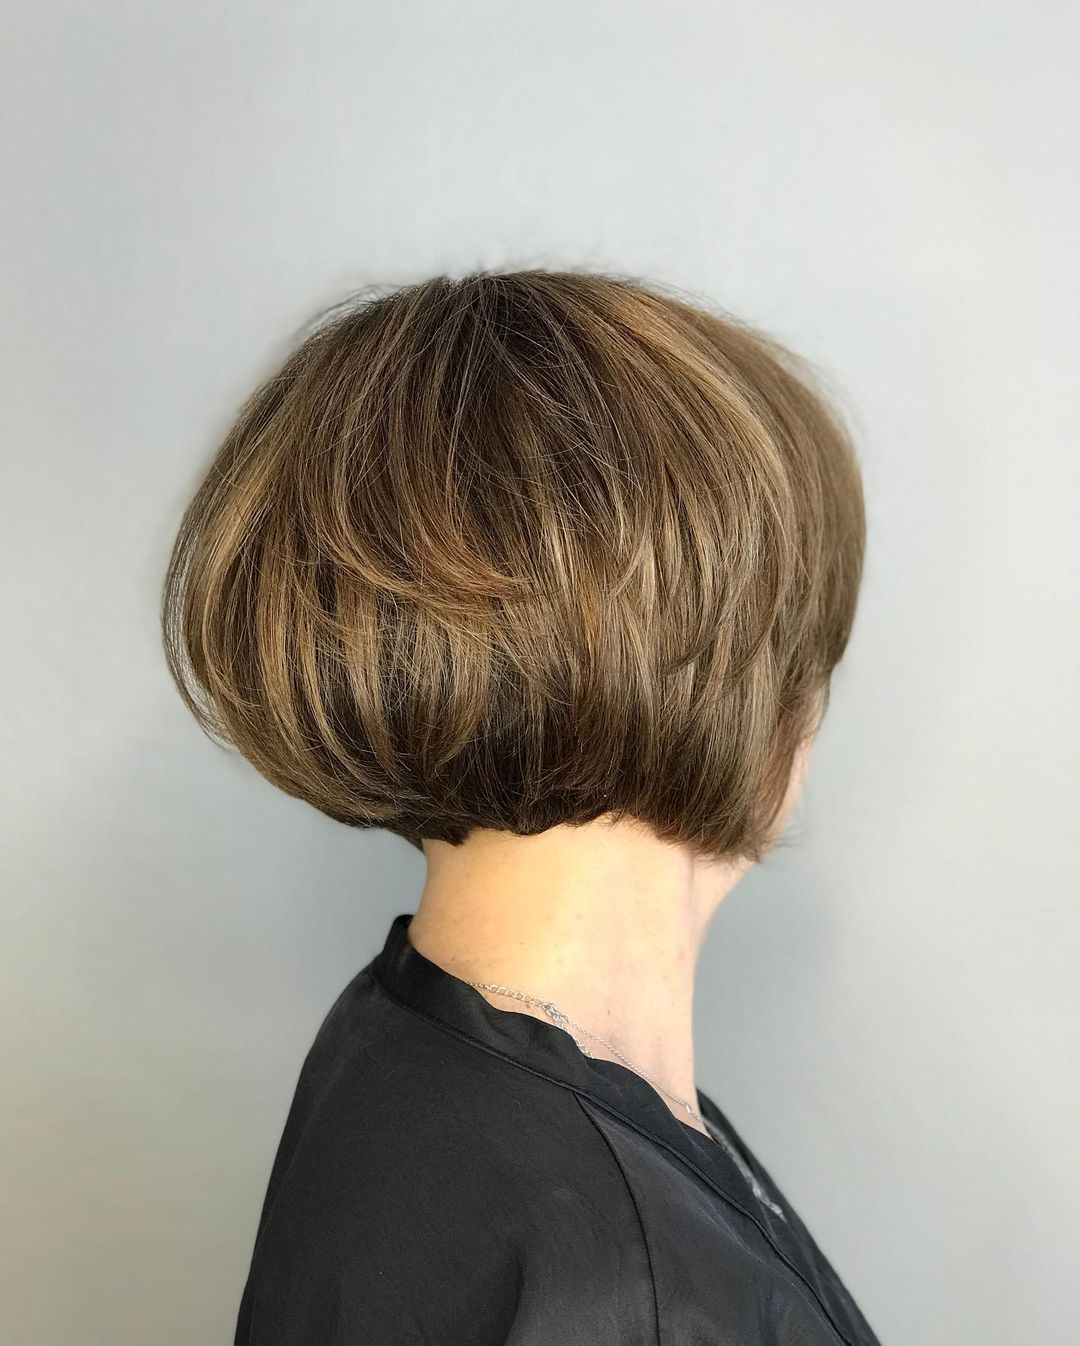 Stacked Bob 28 Long stacked bob | Medium length stacked bob | Pictures of stacked bob haircuts front and back Stacked Bob Hairstyles for Women